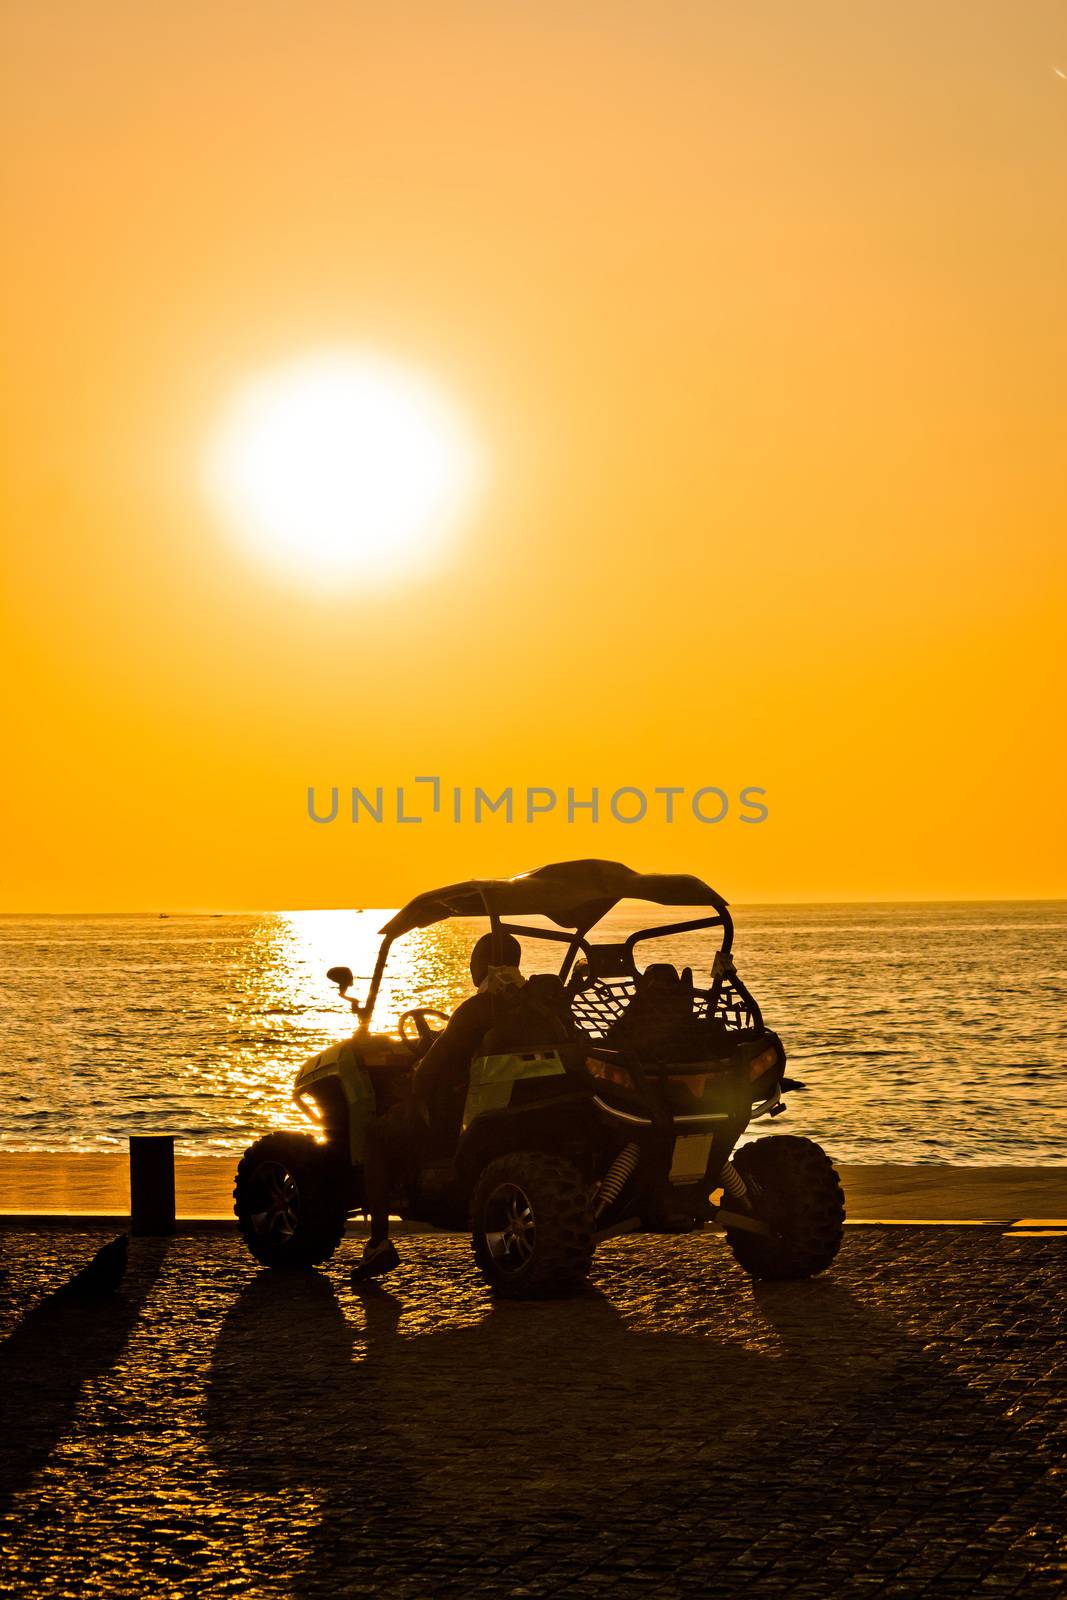 Quad motorbike by the sea at sunset by xbrchx